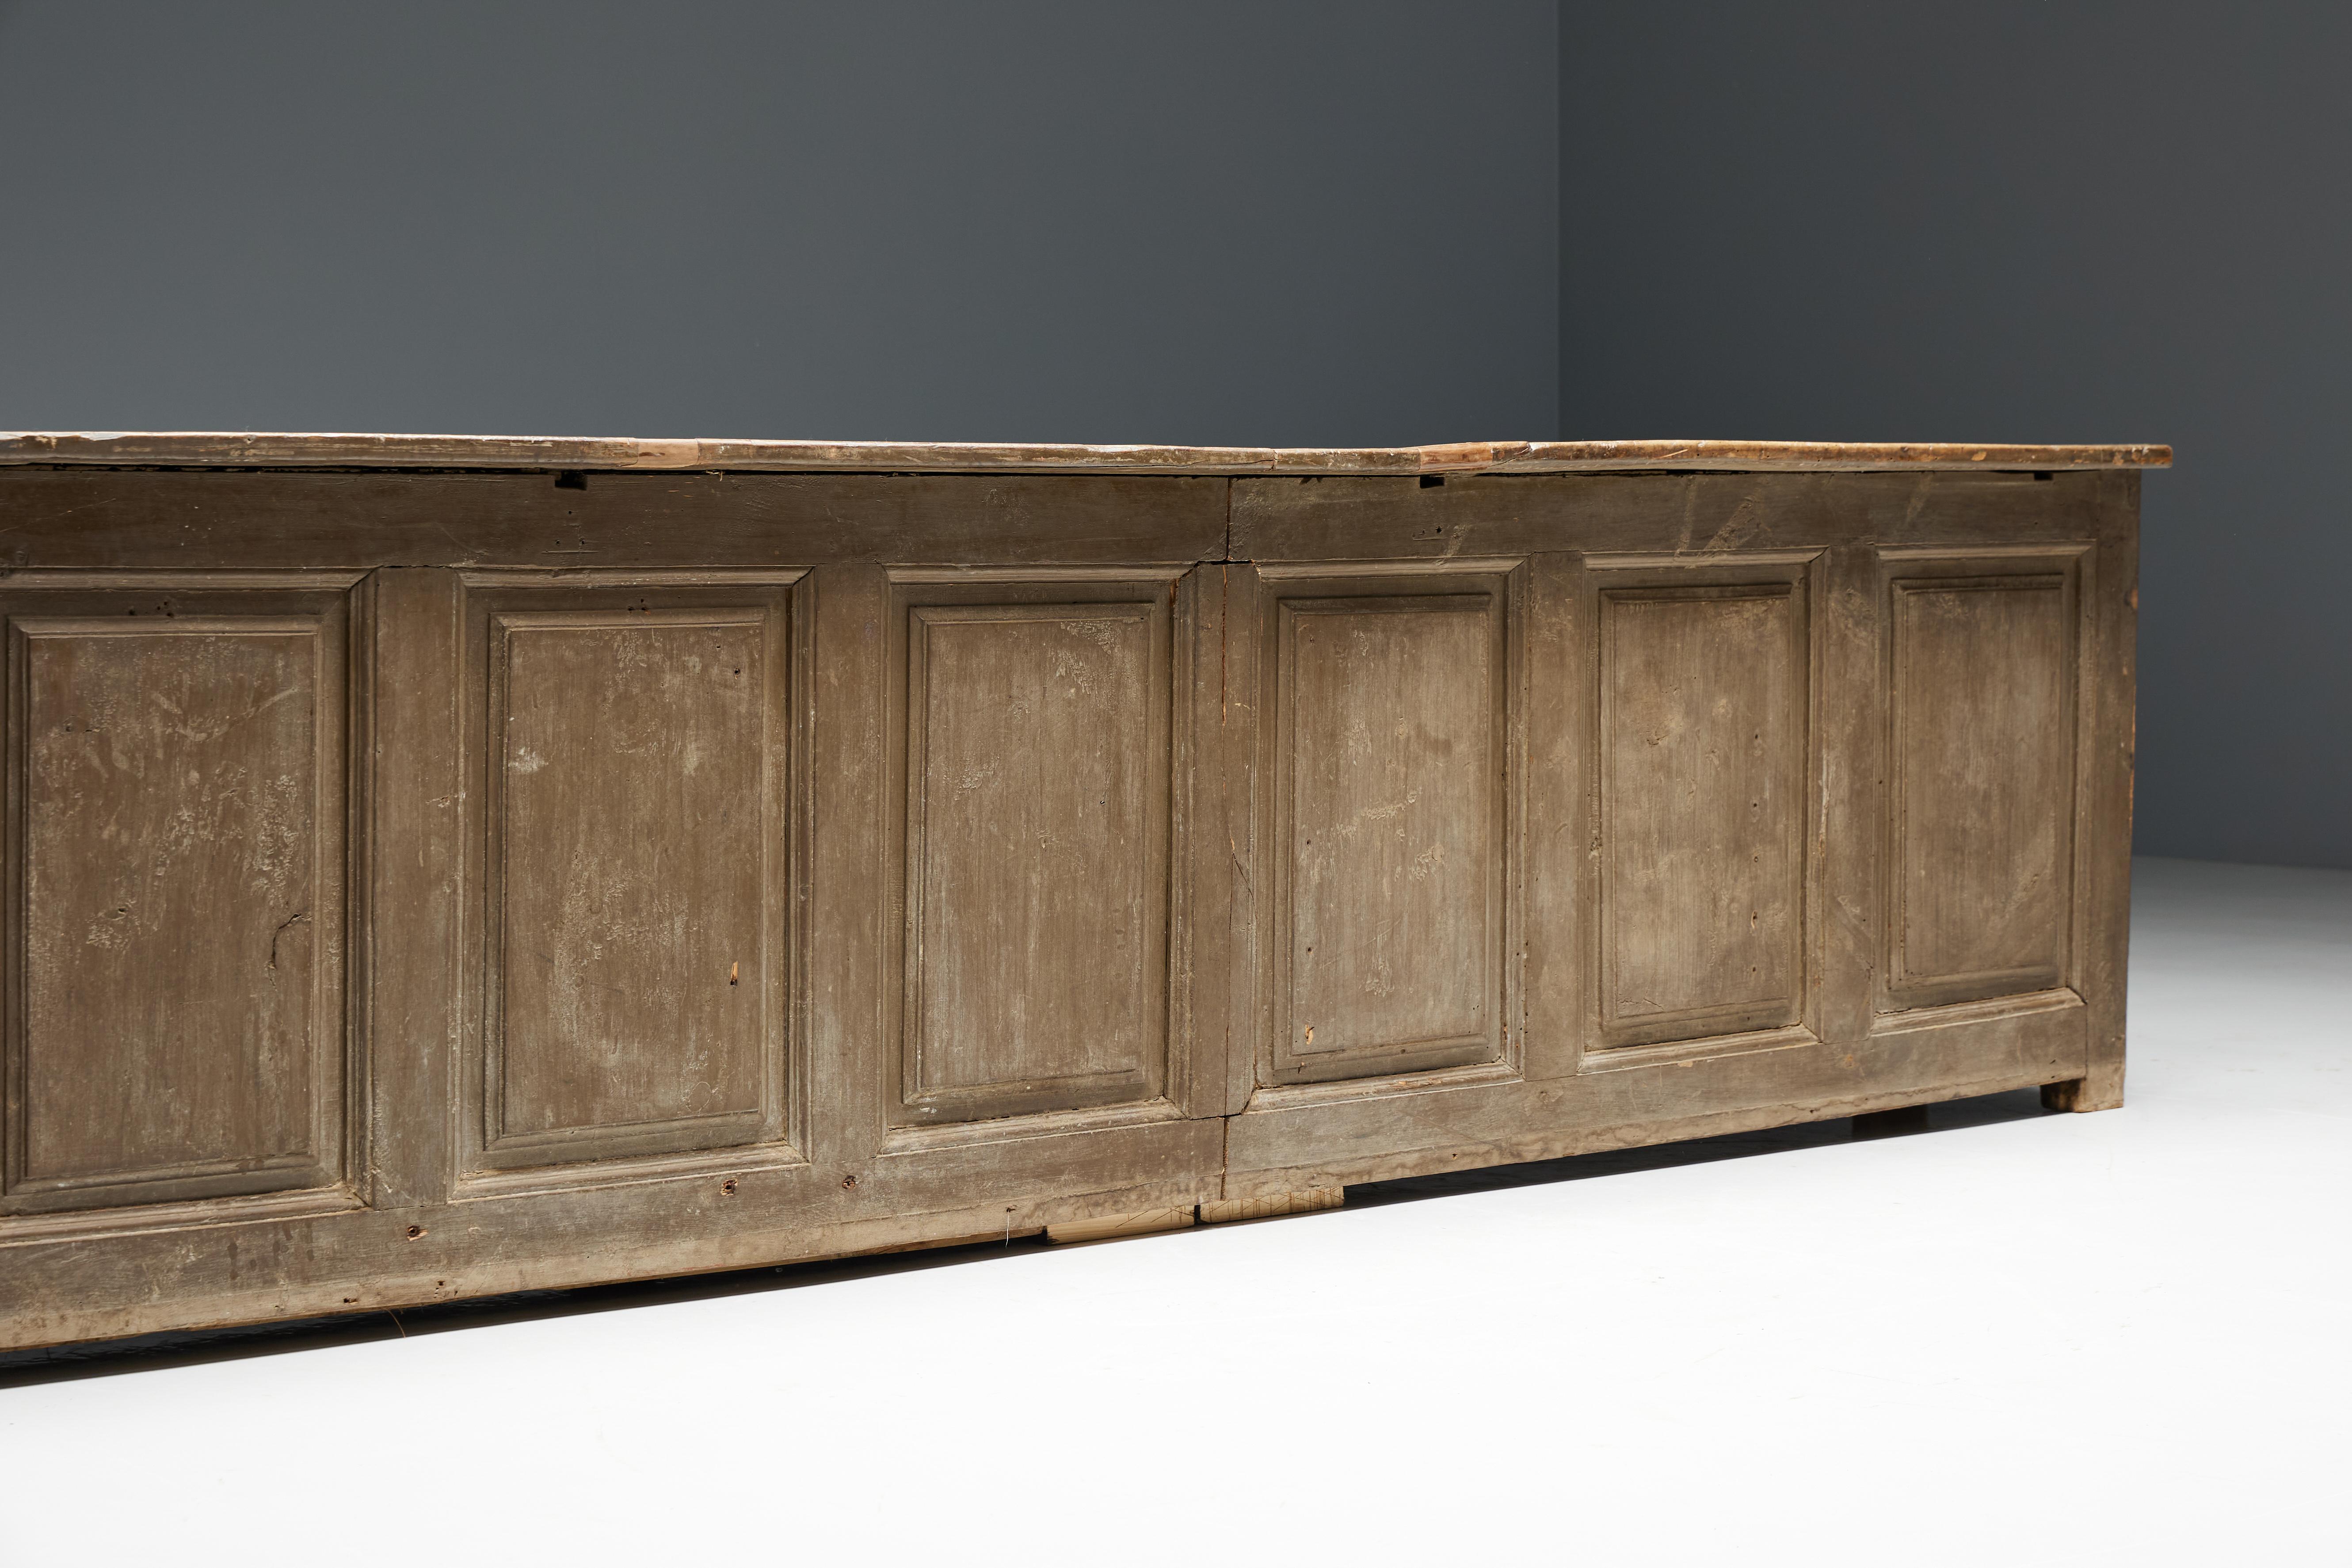 Rustic Art Populaire Freestanding Bar Counter, France, 19th Century For Sale 9